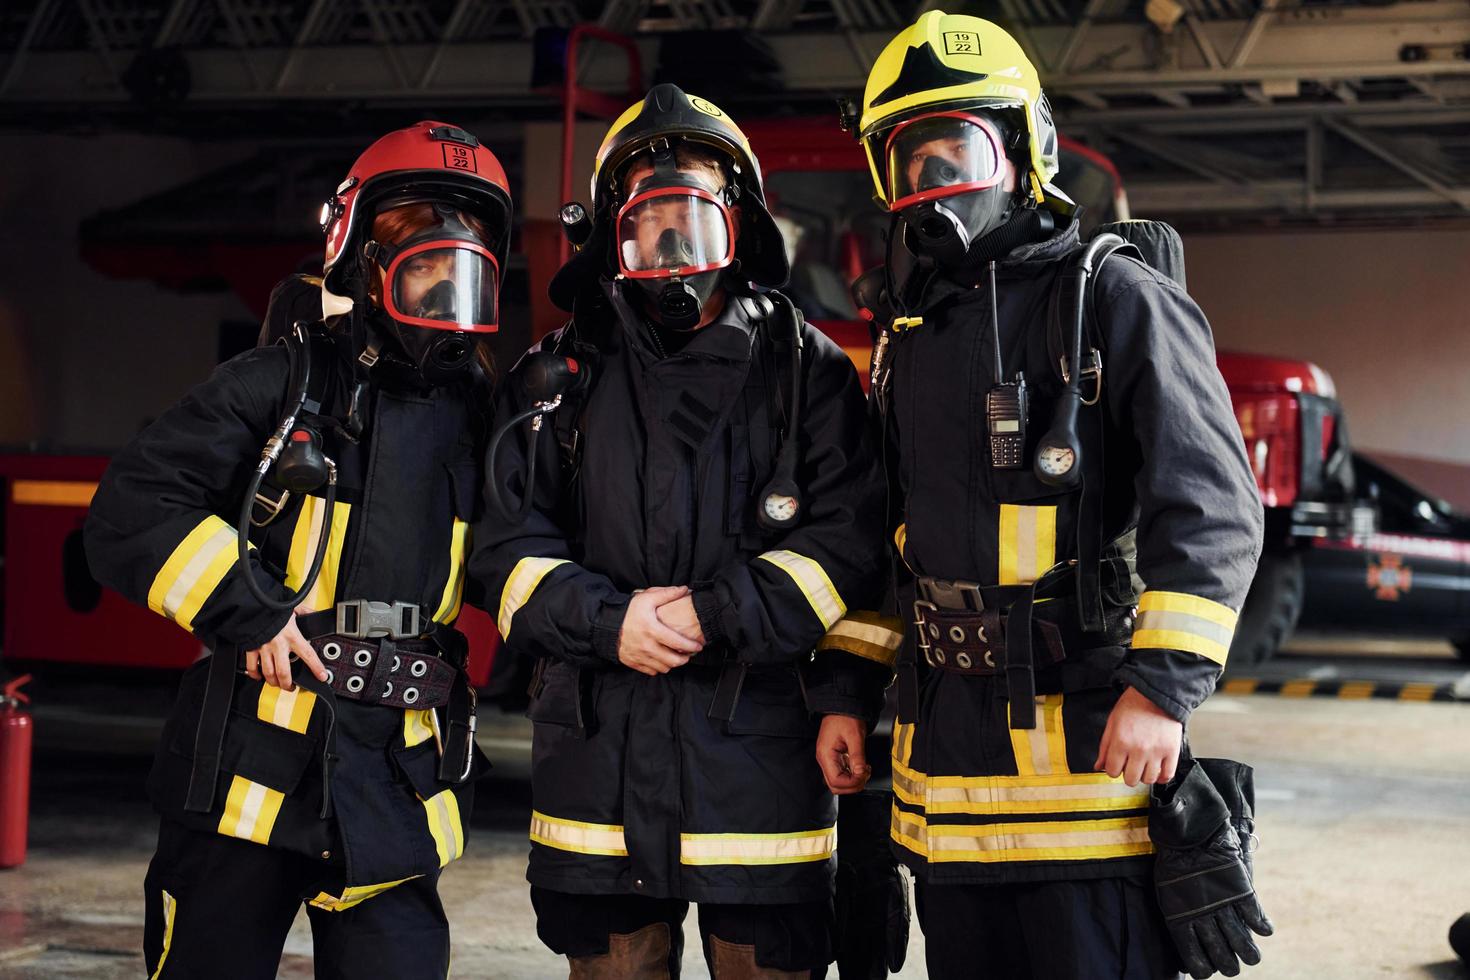 Group of firefighters in protective uniform that is on station photo